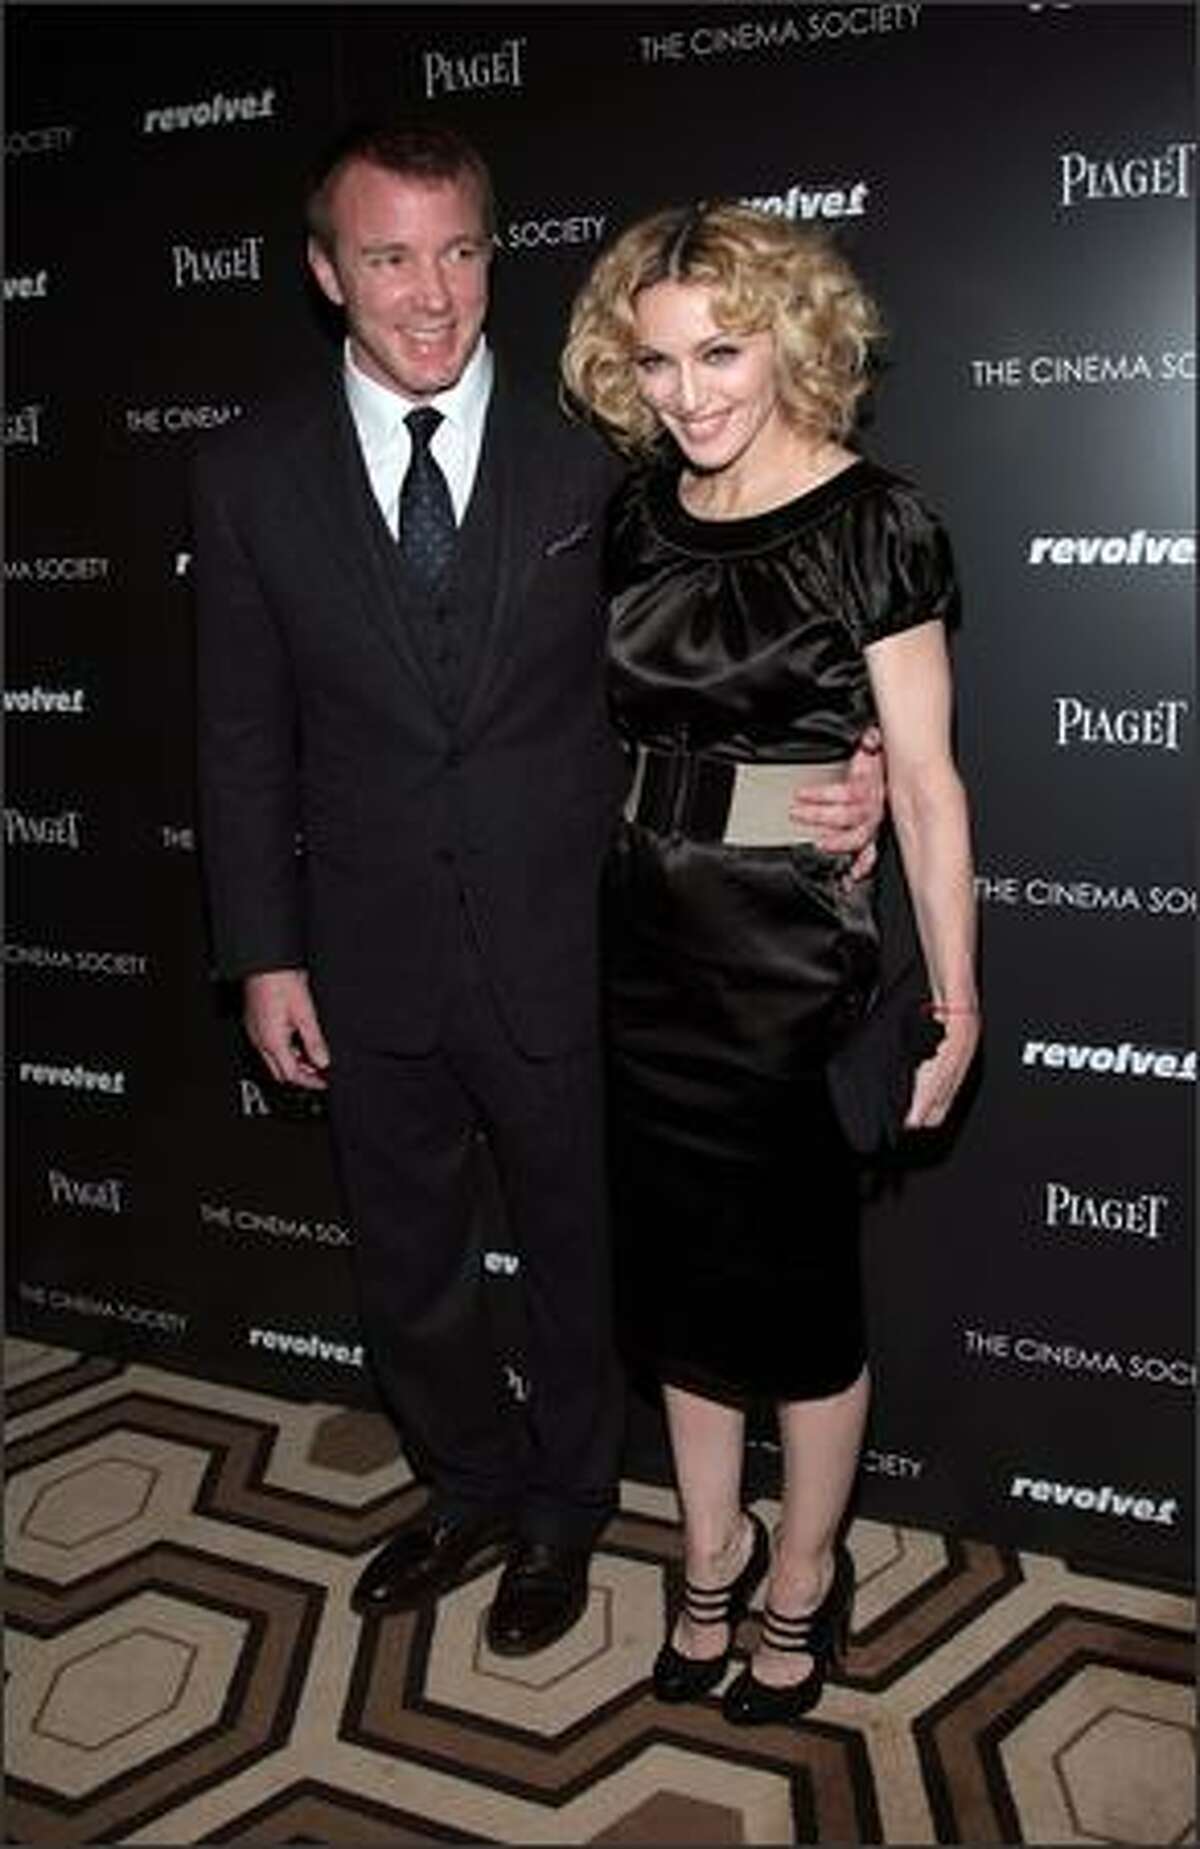 Writer/director Guy Ritchie and musician Madonna attend a screening of "Revolver" hosted by the Cinema Society and Piaget at the Tribeca Grand Screening Room on Sunday in New York City.